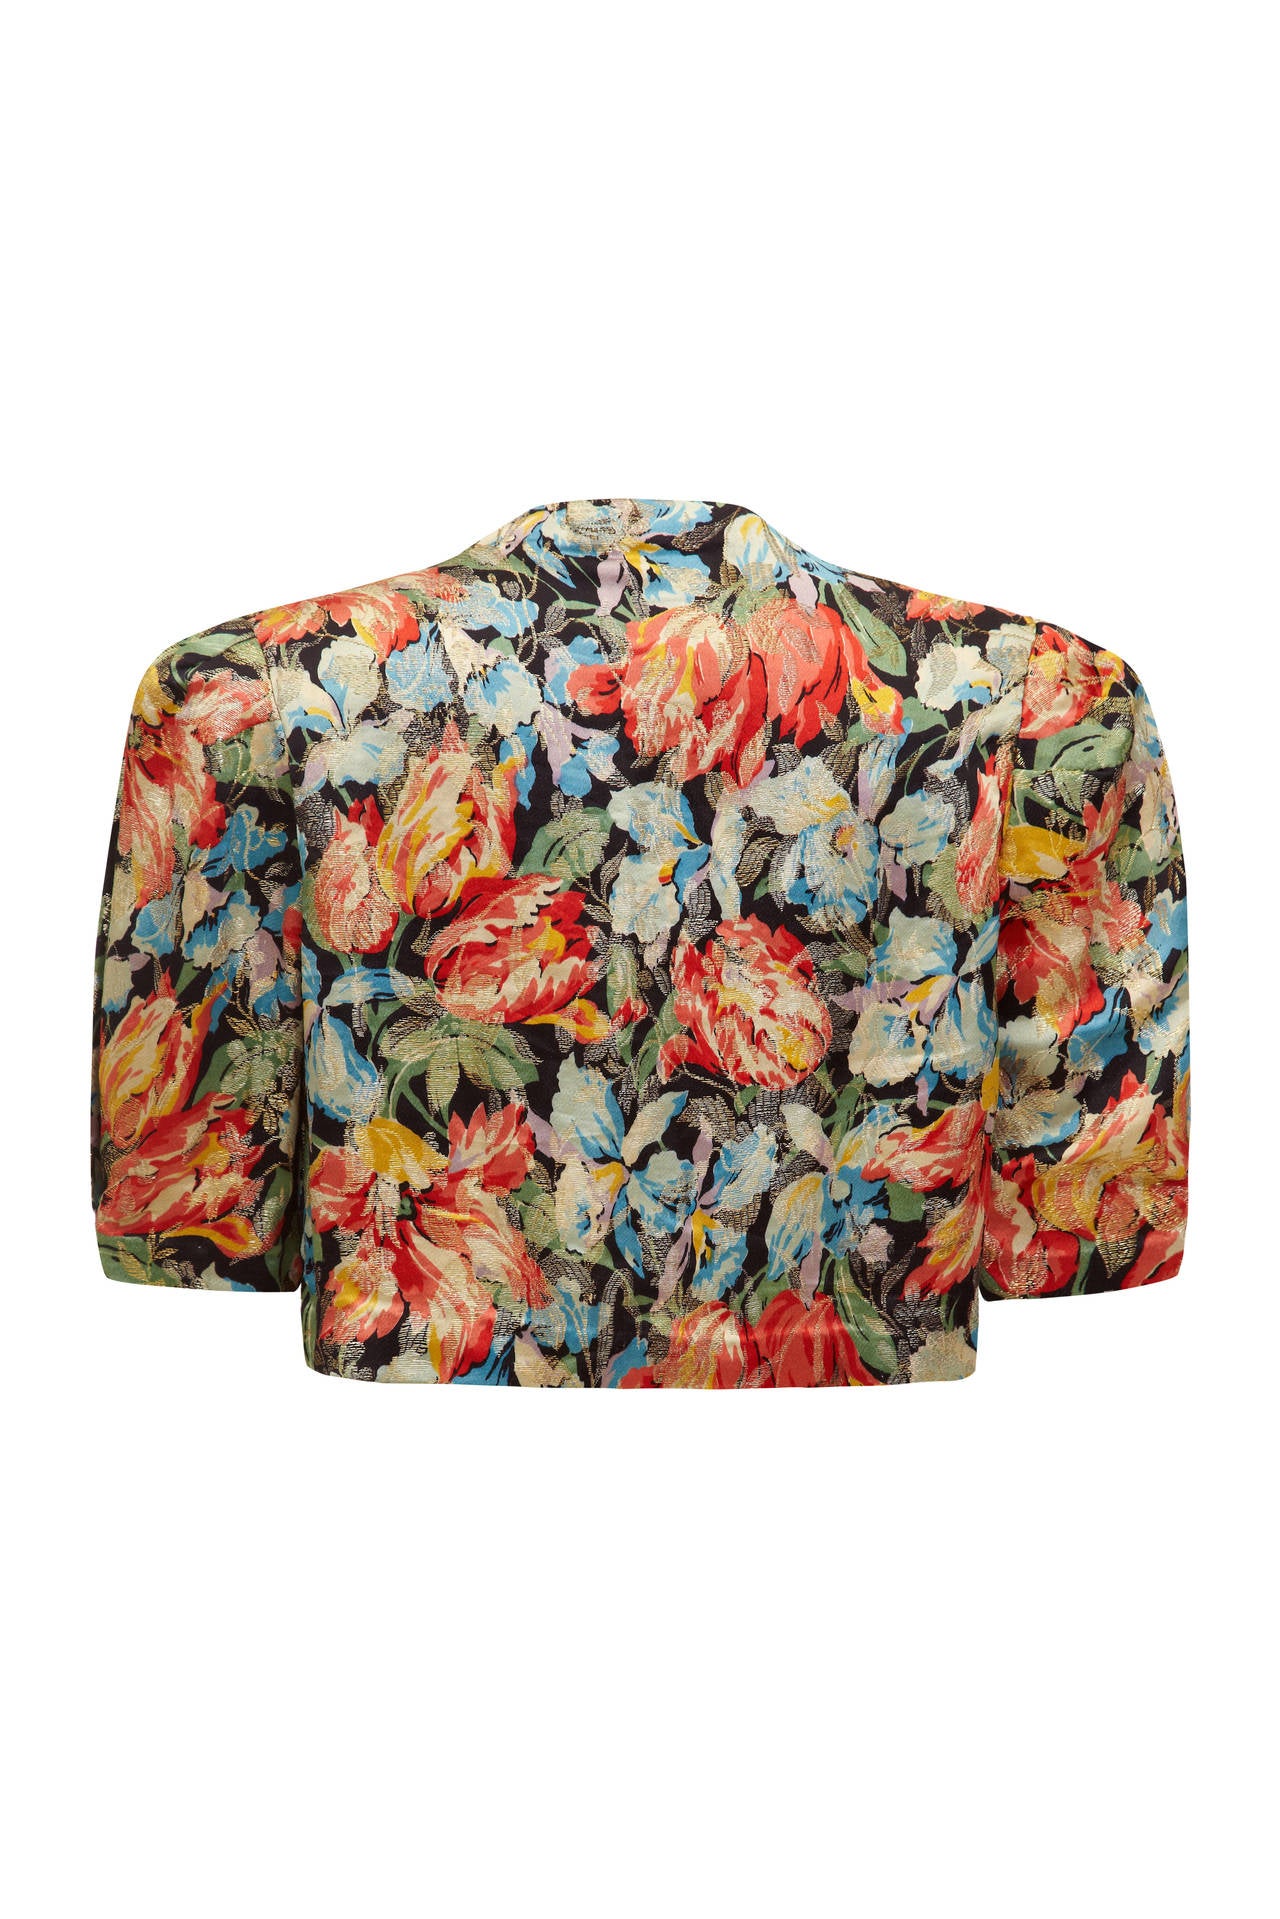 Stunning 1930s bright floral print jacket / bolero with a beautiful gold lame floral design layered on top. As this piece is worn open with no fastenings there is slight flexibility in size and there is slight padding to the shoulders to give some